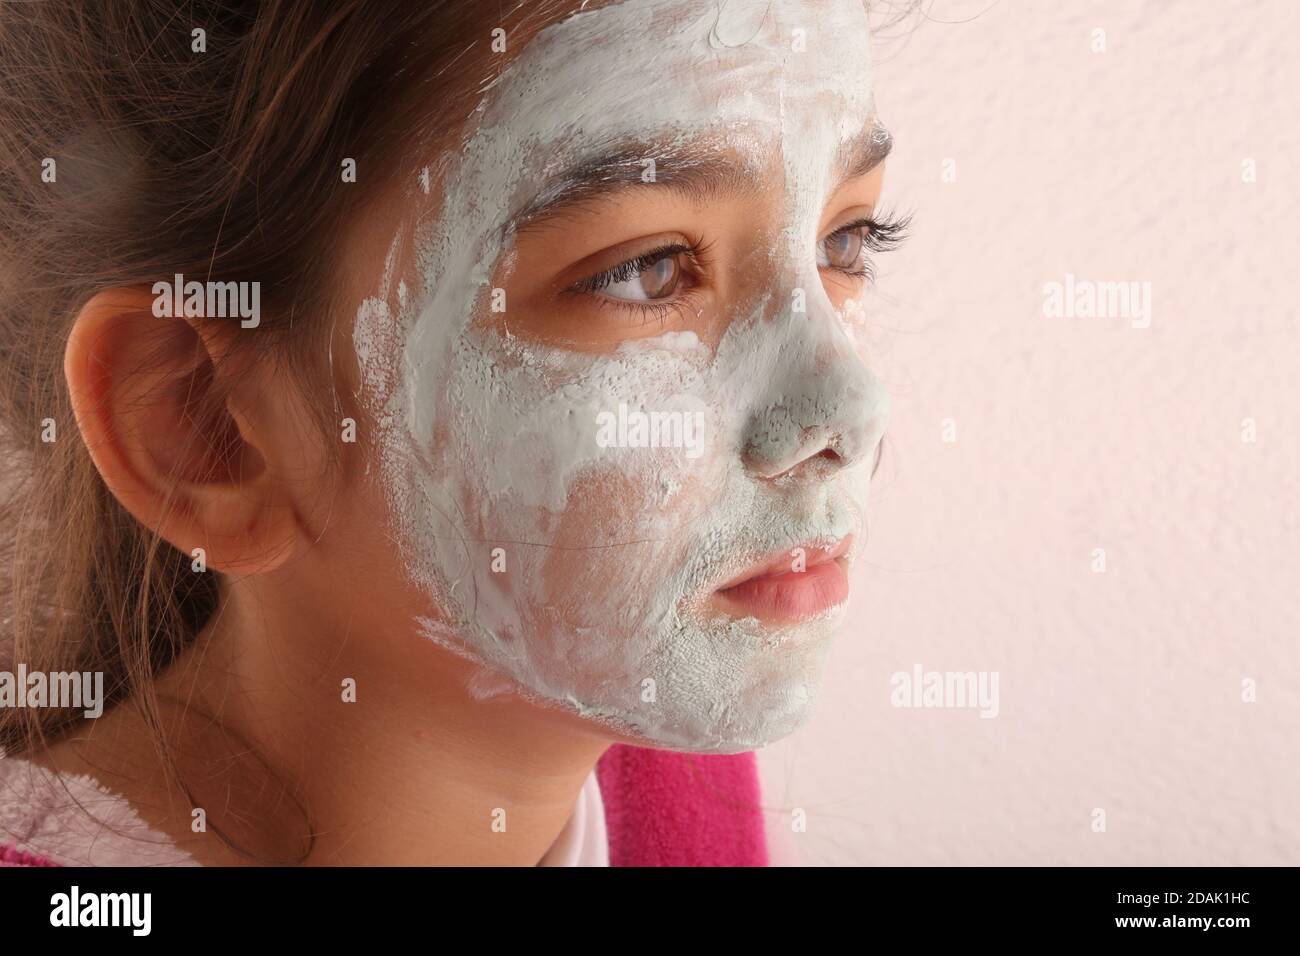 girl with face care mask cream Stock Photo